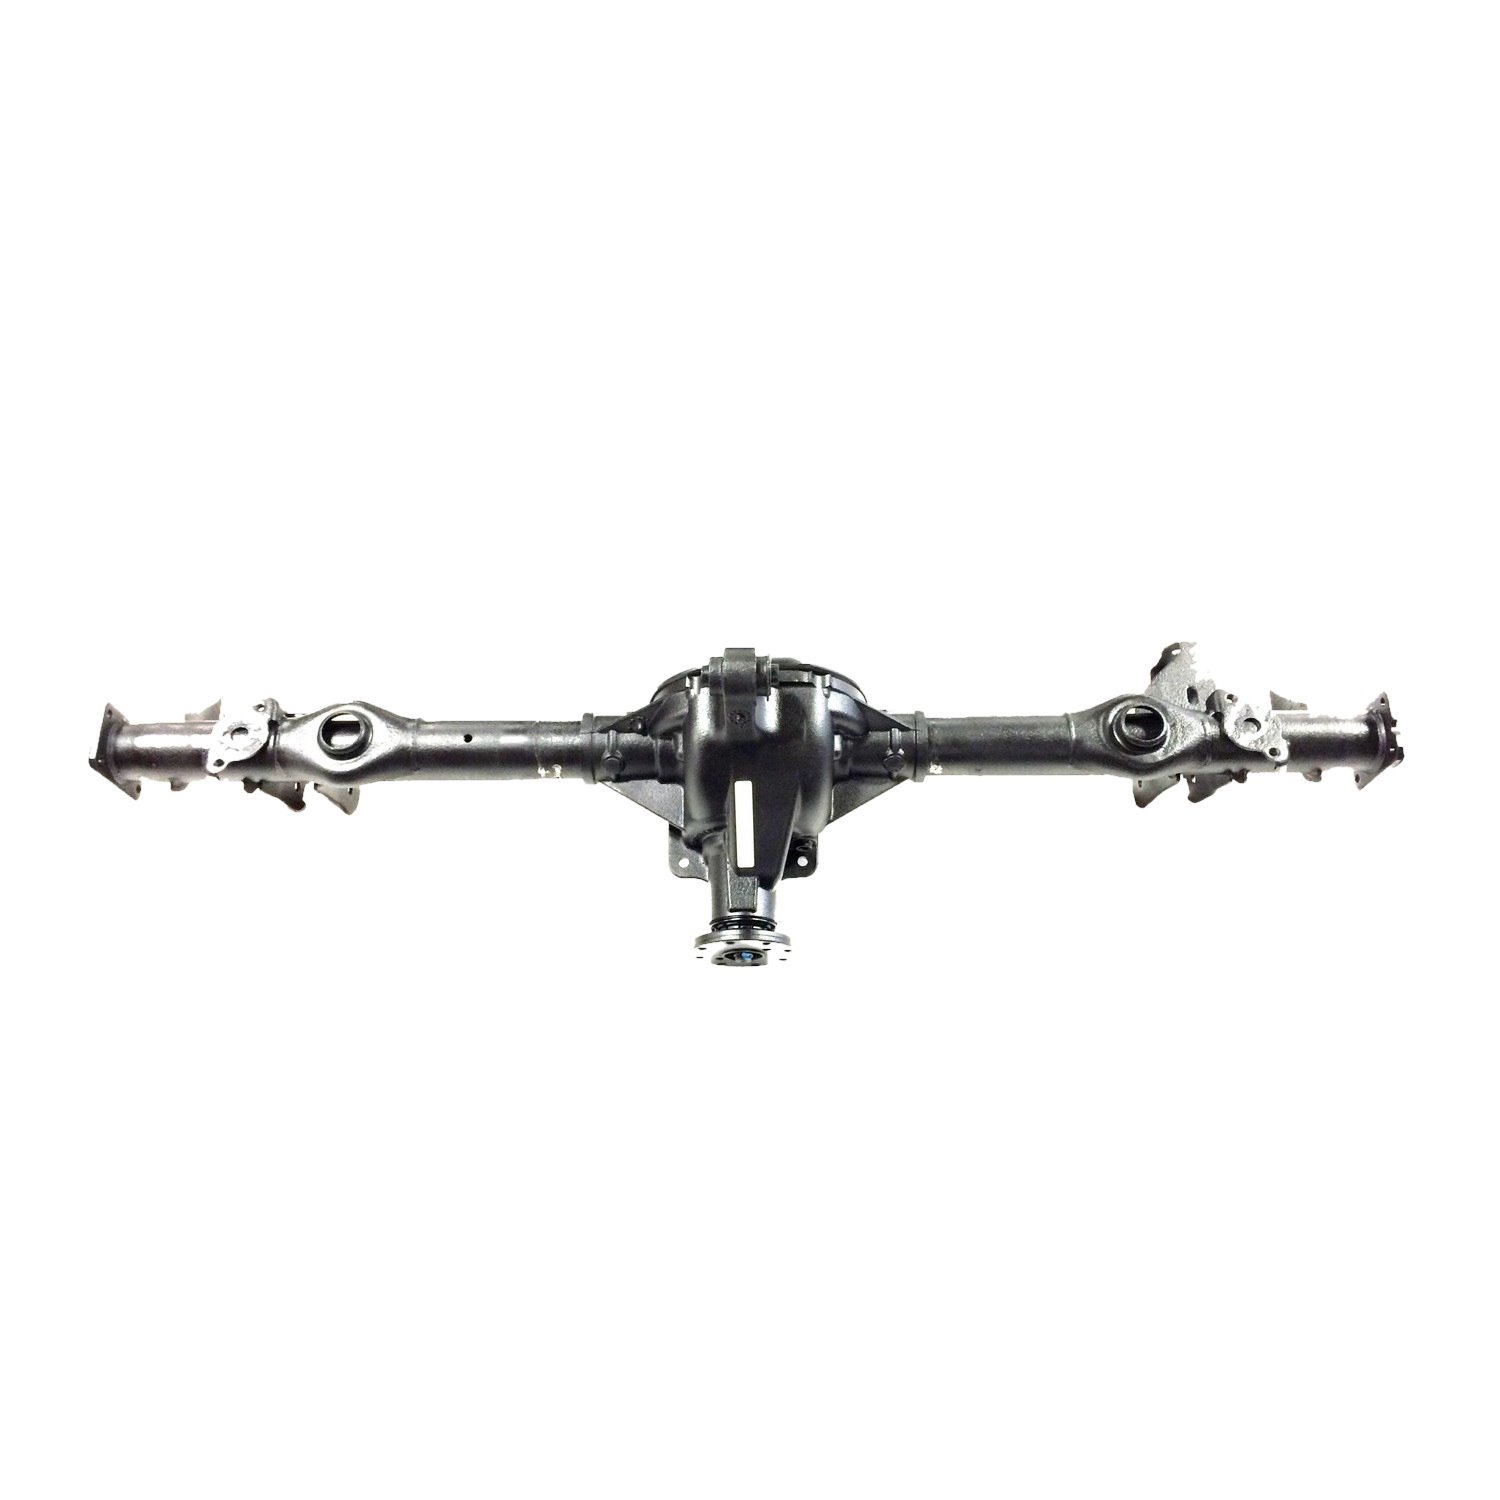 Remanufactured Axle Assy, GM 10 Bolt 8.5 In., 3.08 Ratio, w/o Posi Traction